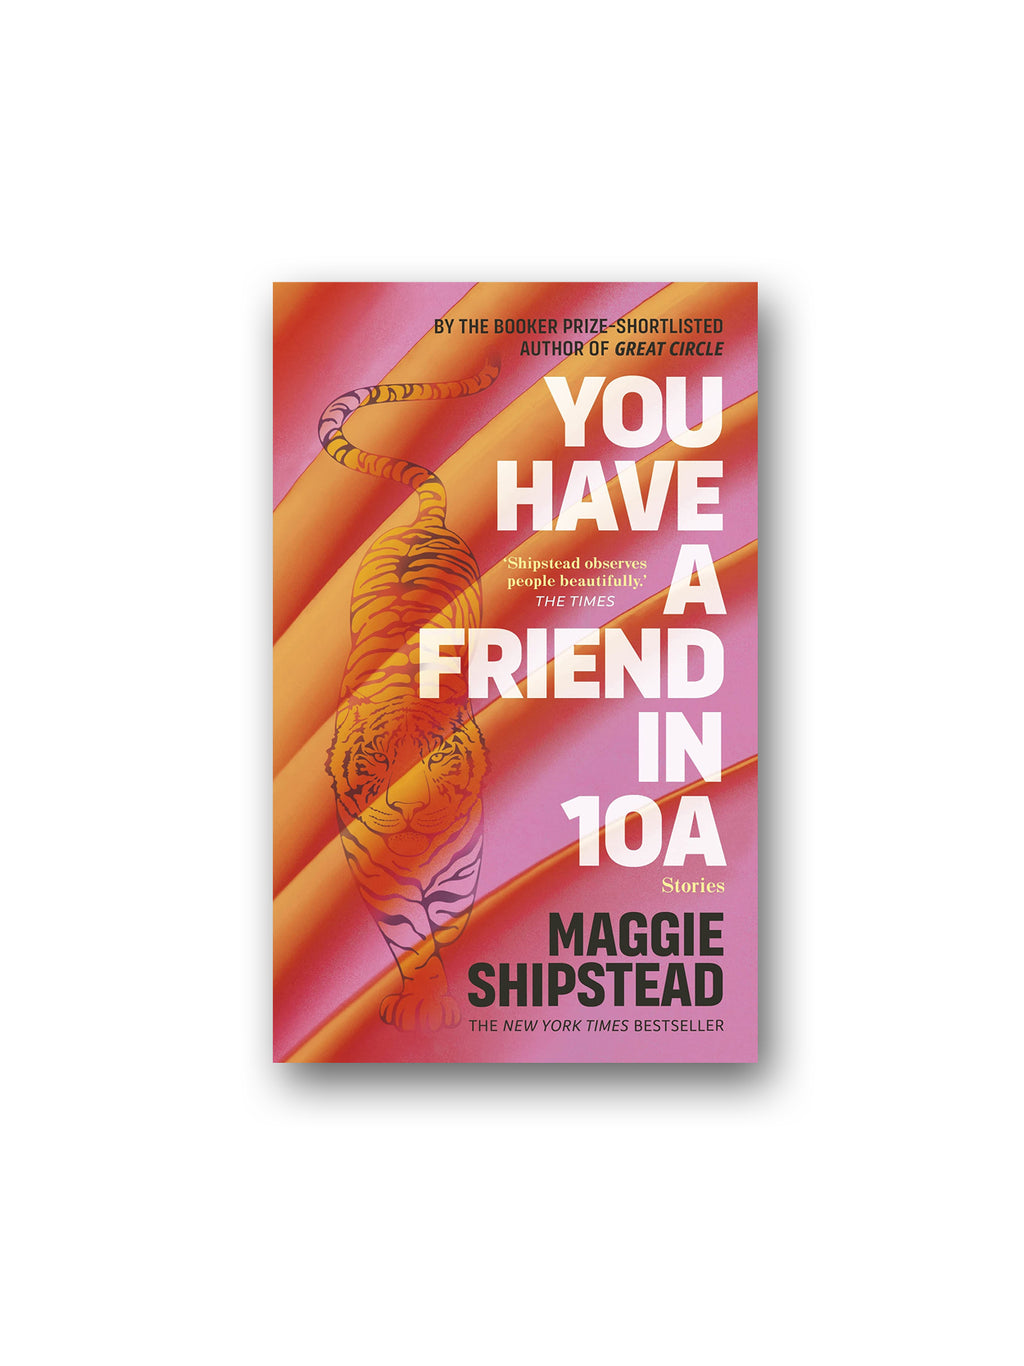 You have a friend in 10A : By the 2022 Women's Fiction Prize and 2021 Booker Prize shortlisted author of GREAT CIRCLE